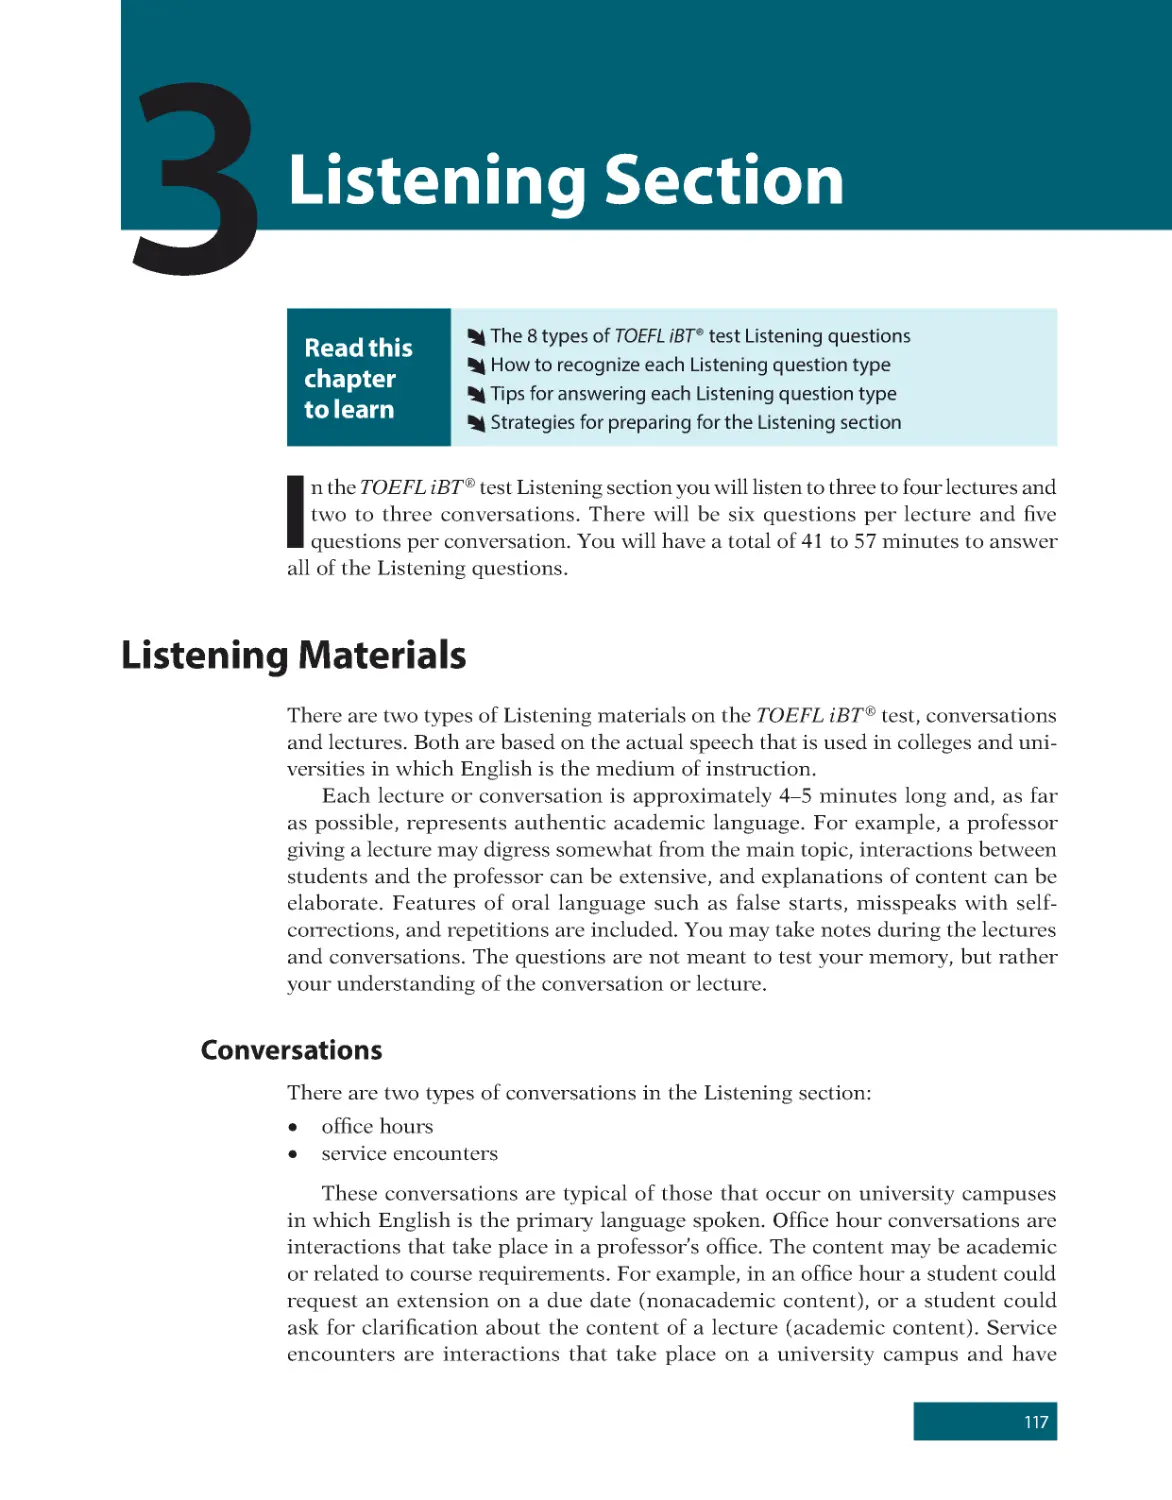 3 Listening Section